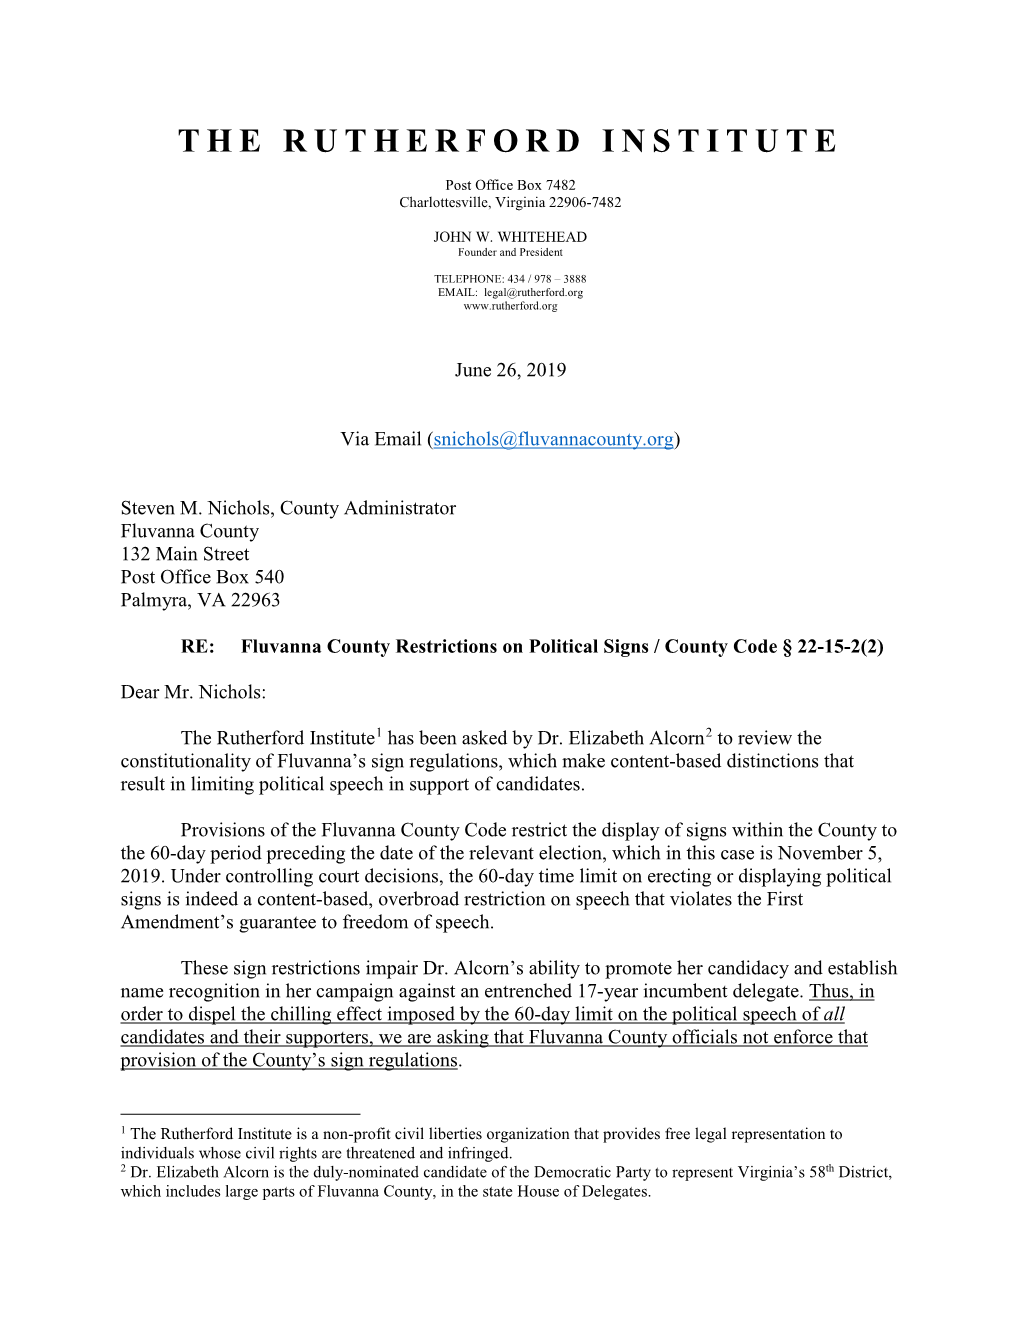 The Rutherford Institute's Letter to Fluvanna County Regarding Its Sign